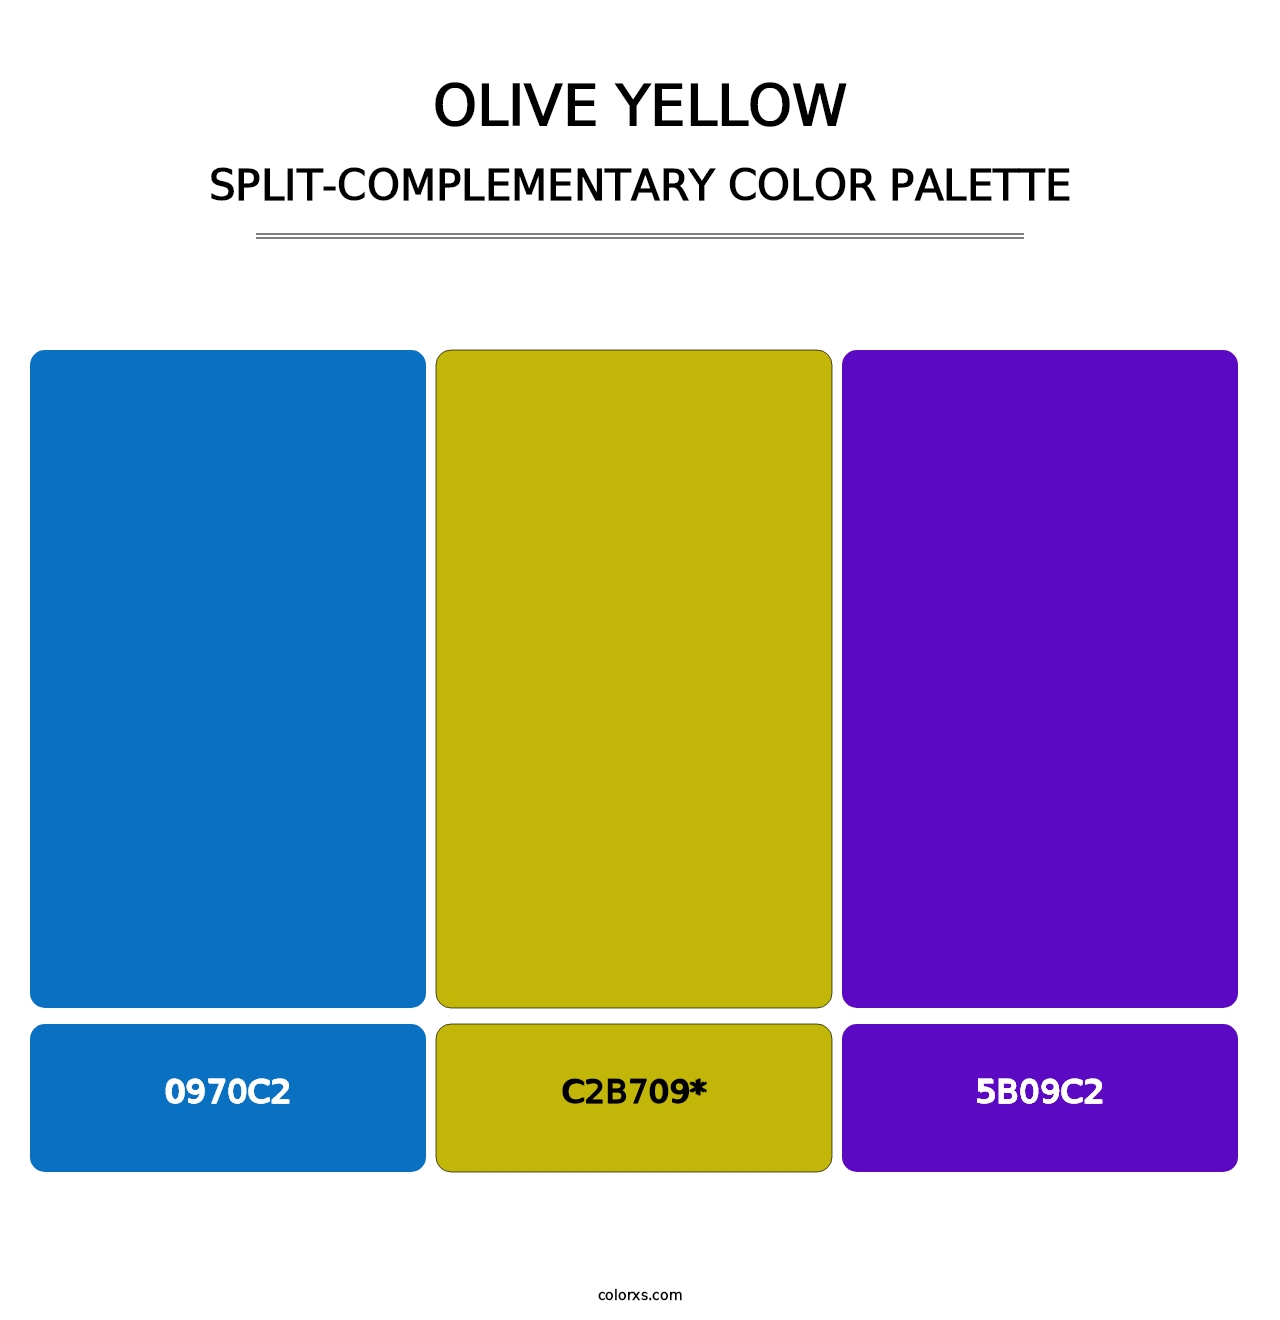 Olive Yellow - Split-Complementary Color Palette